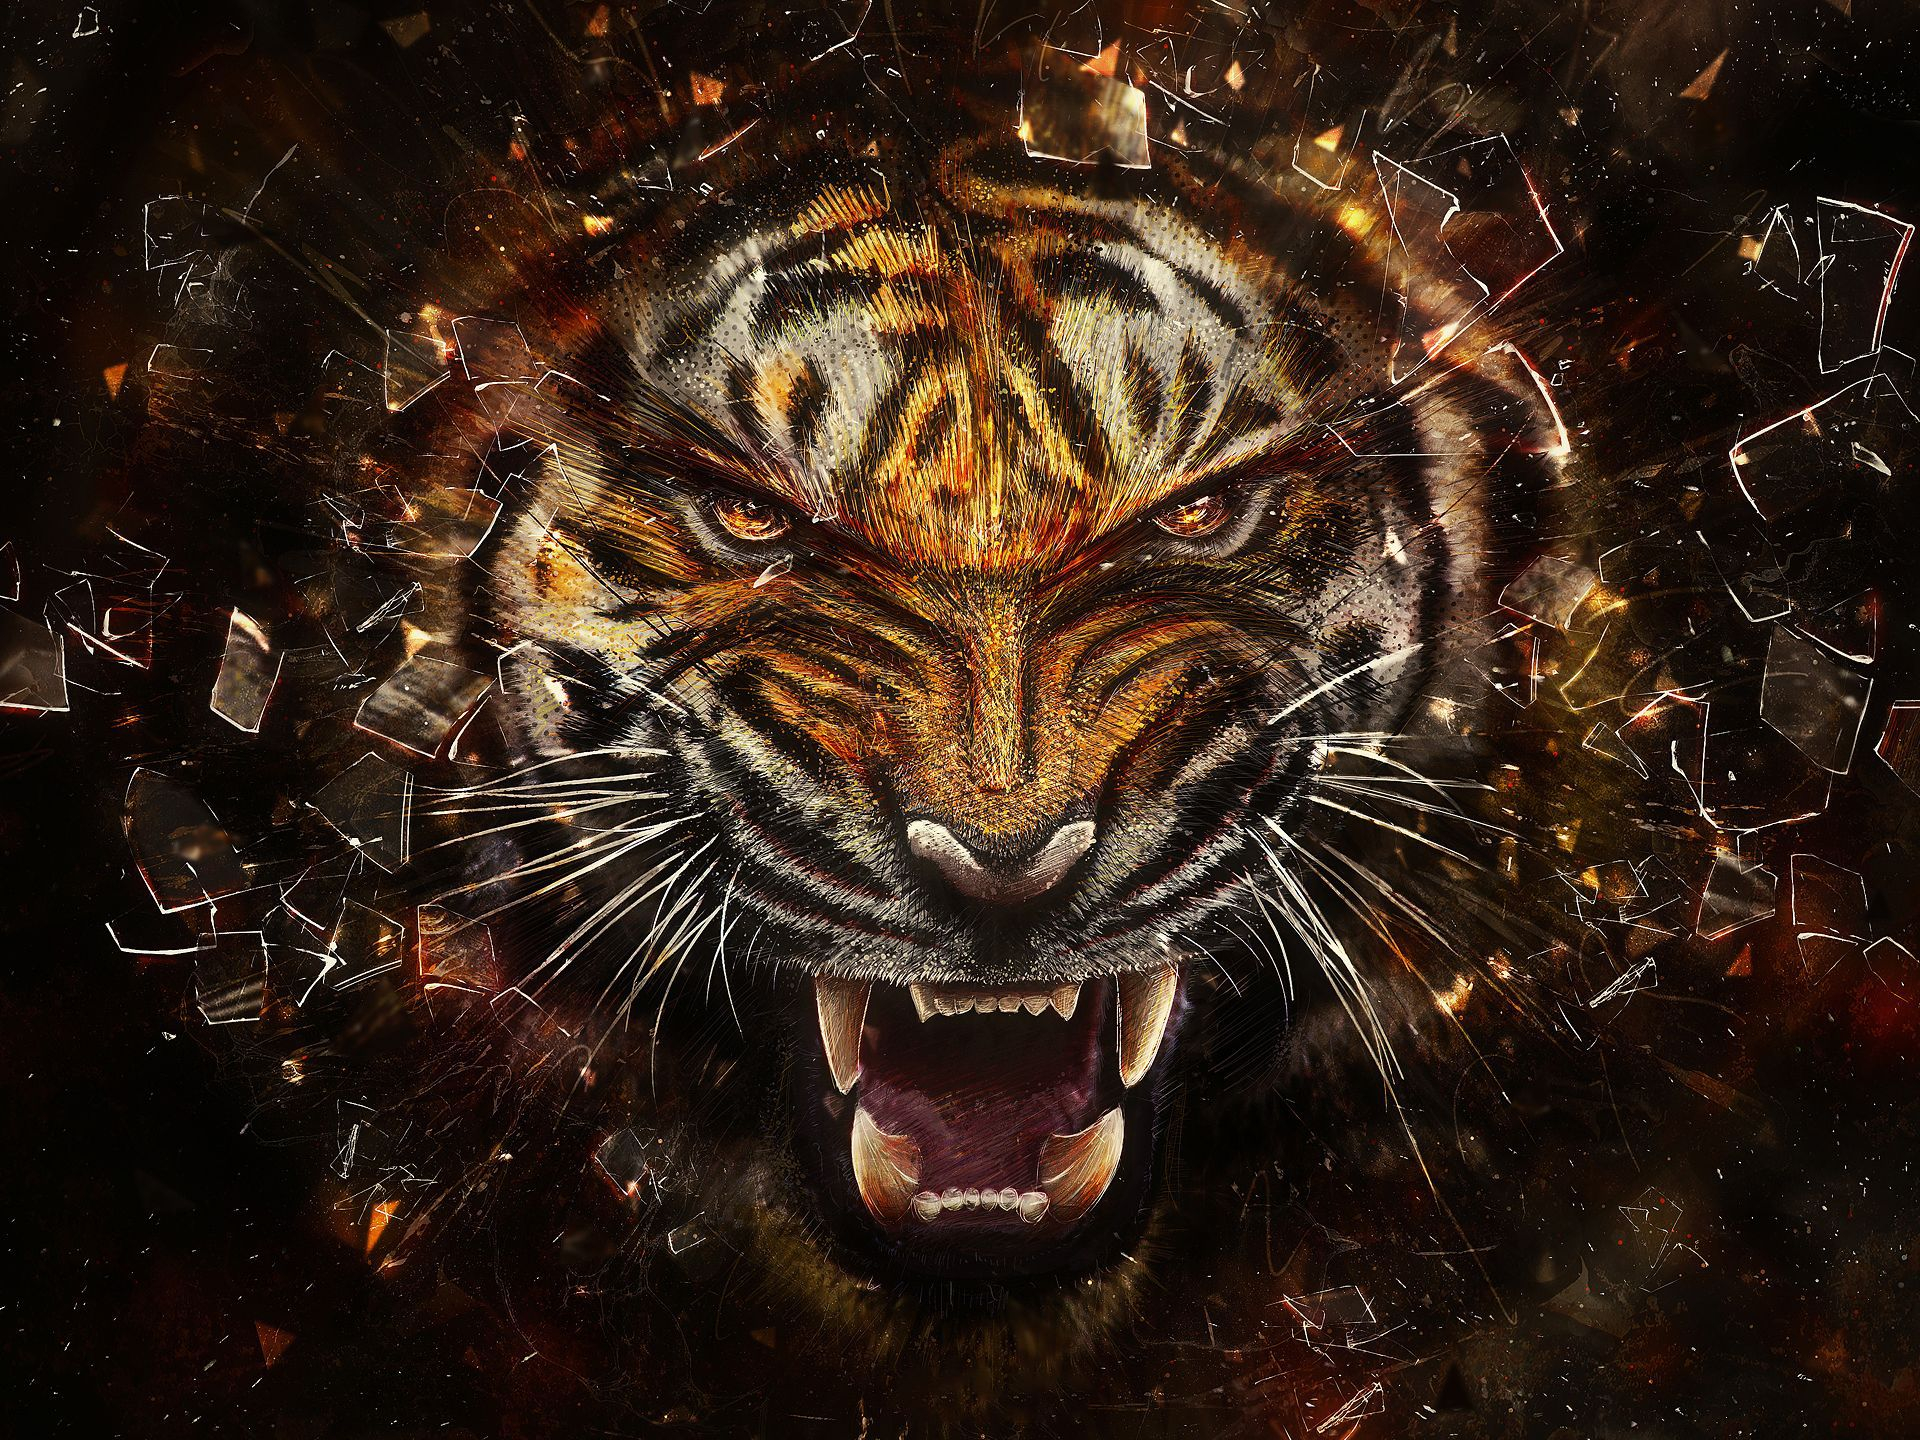 1920x1440 1600+ Tiger HD Wallpapers and Backgrounds